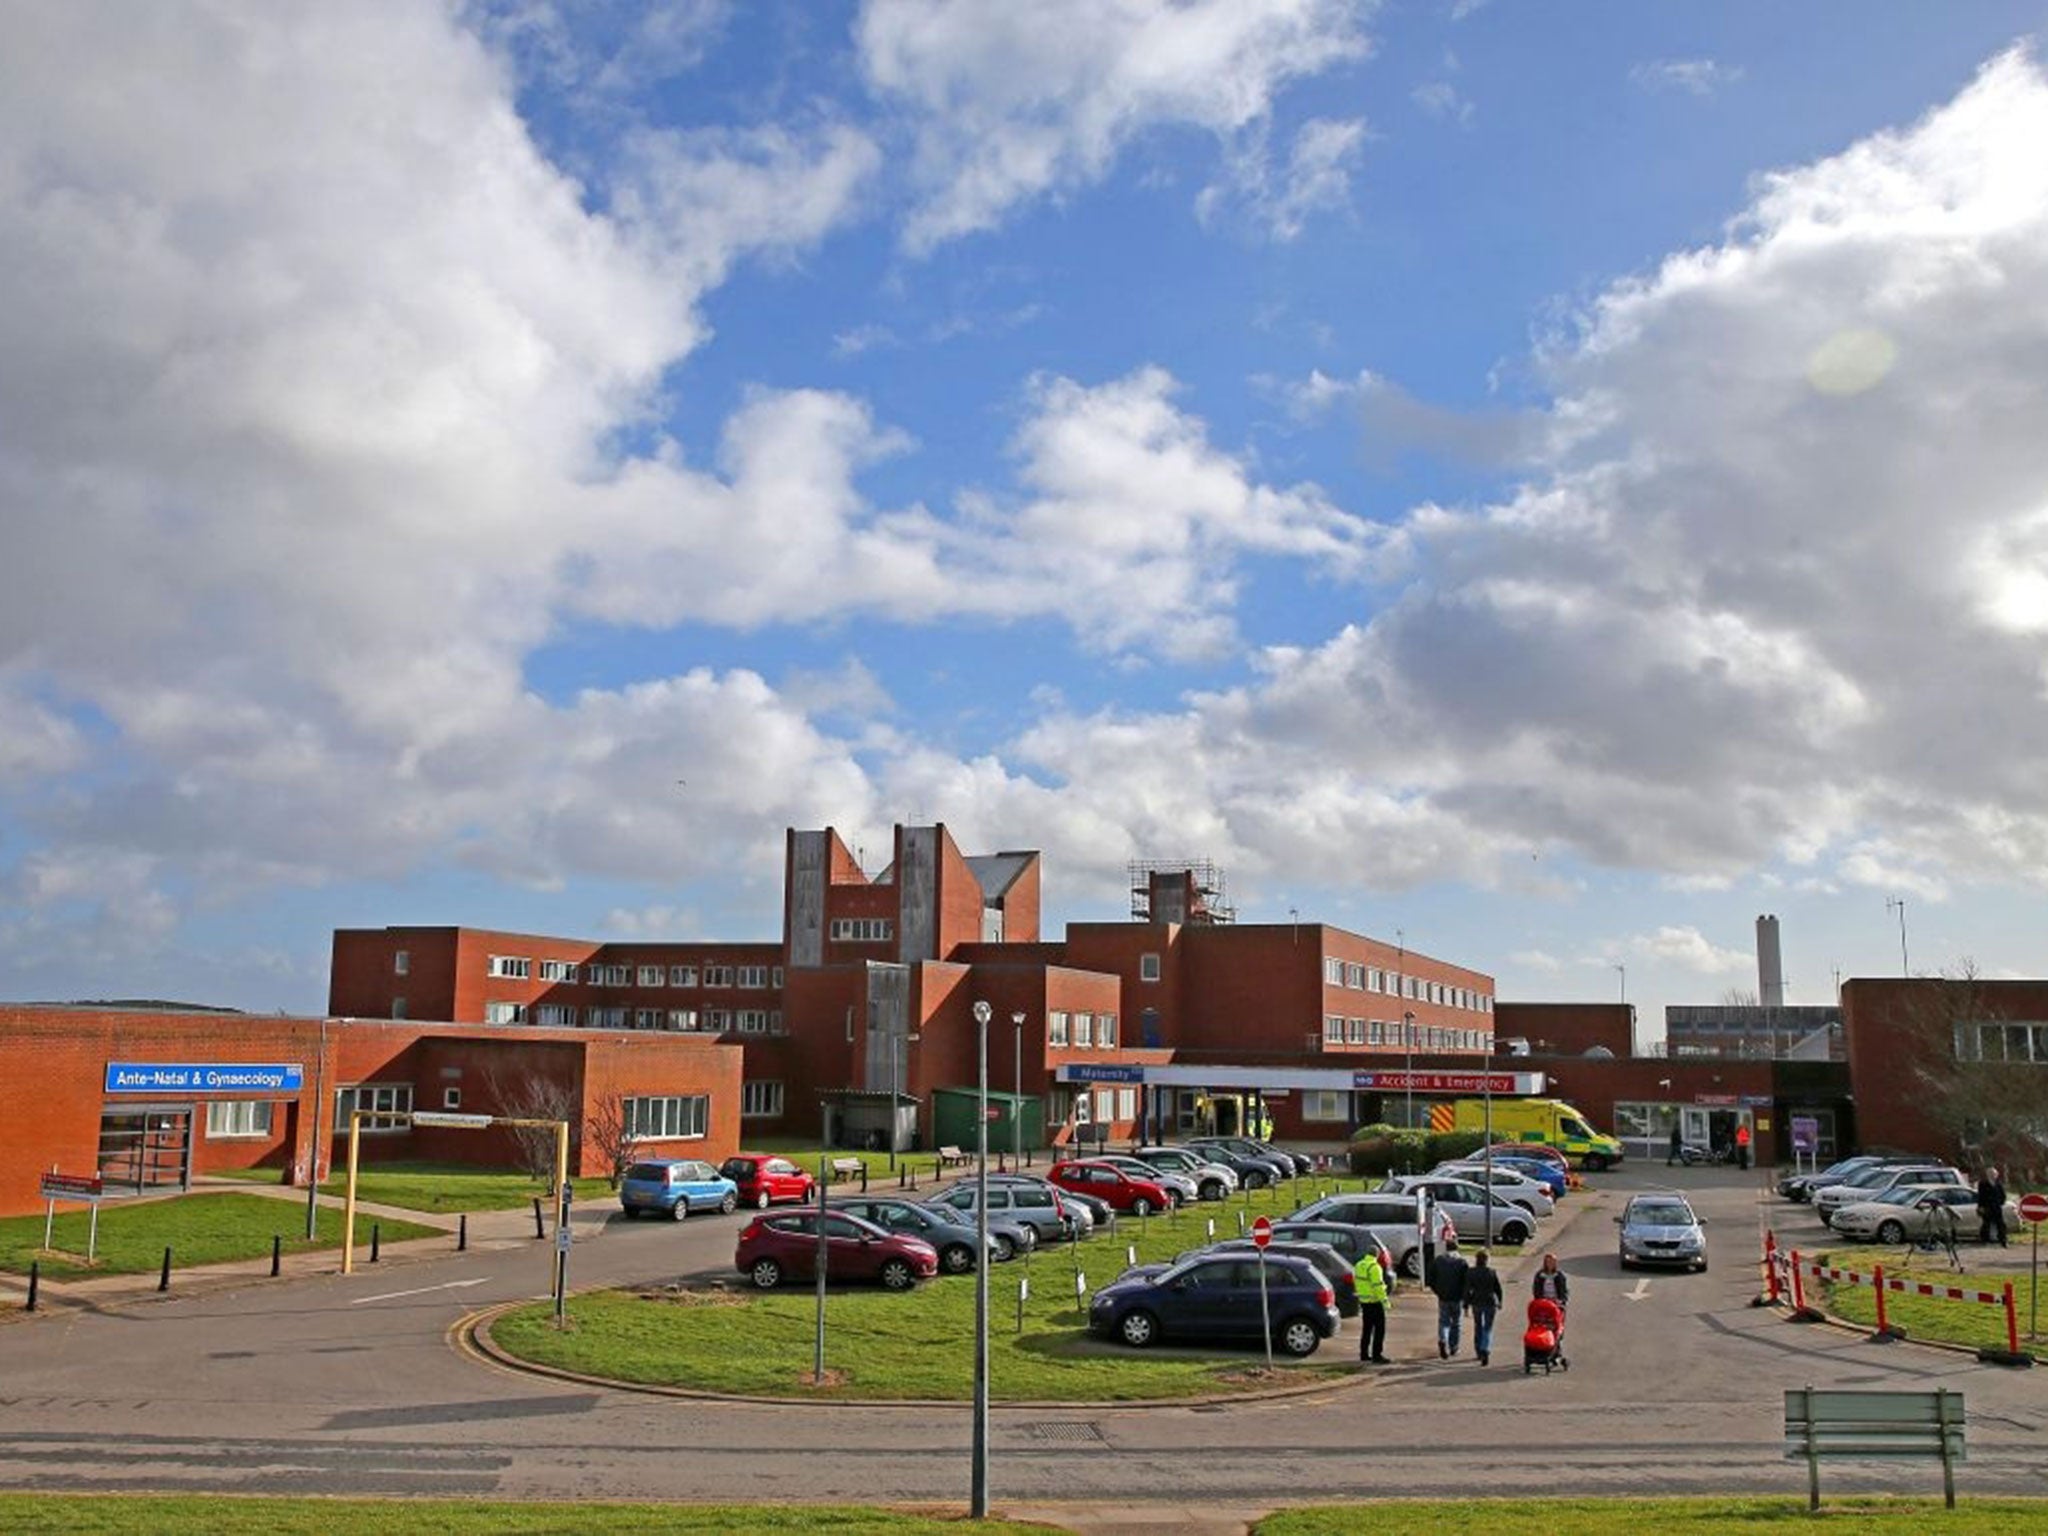 A general view of Furness Hospital in Barrow, Cumbria, which is at the heart of the Morecambe Bay Investigation.